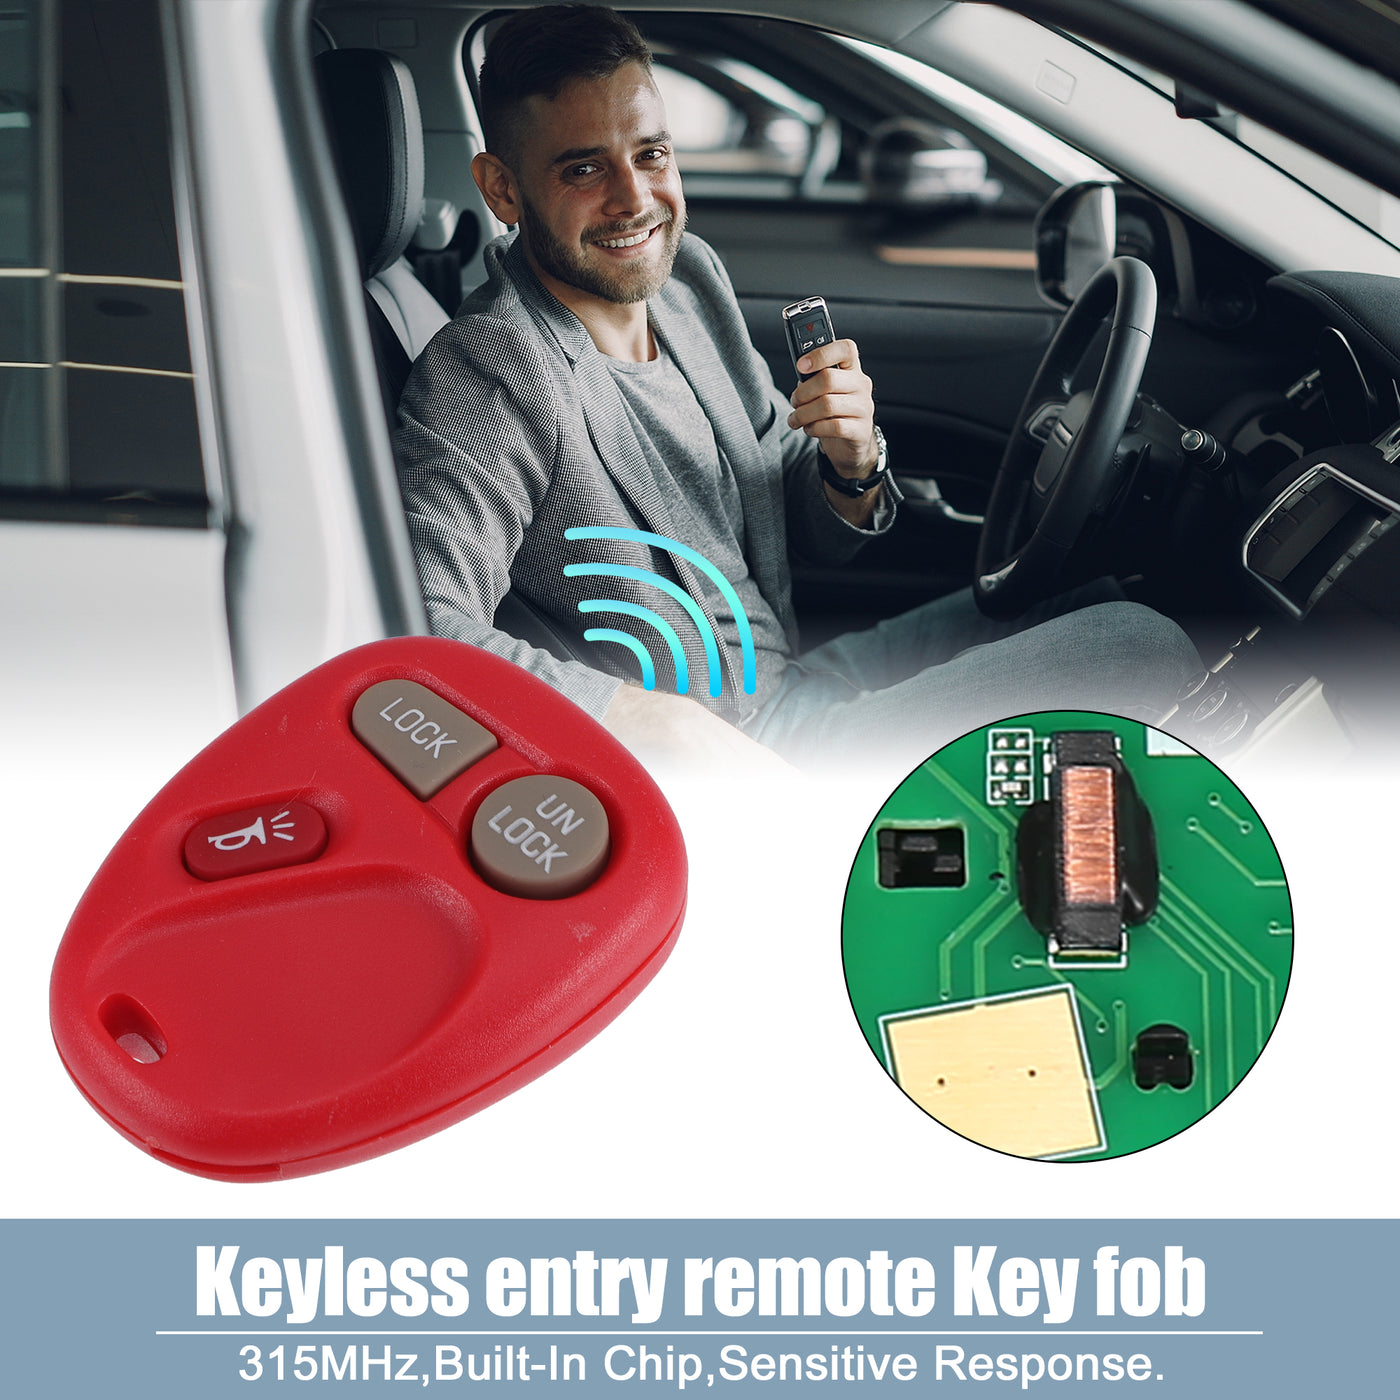 X AUTOHAUX 315MHz KOBLEAR1XT Replacement Keyless Entry Remote Key Fob for Chevrolet Silverado for GMC Sierra 1500 2500 3500 01-02 for Chevrolet Suburban 1500 2500 2001-2002 3 Buttons Key